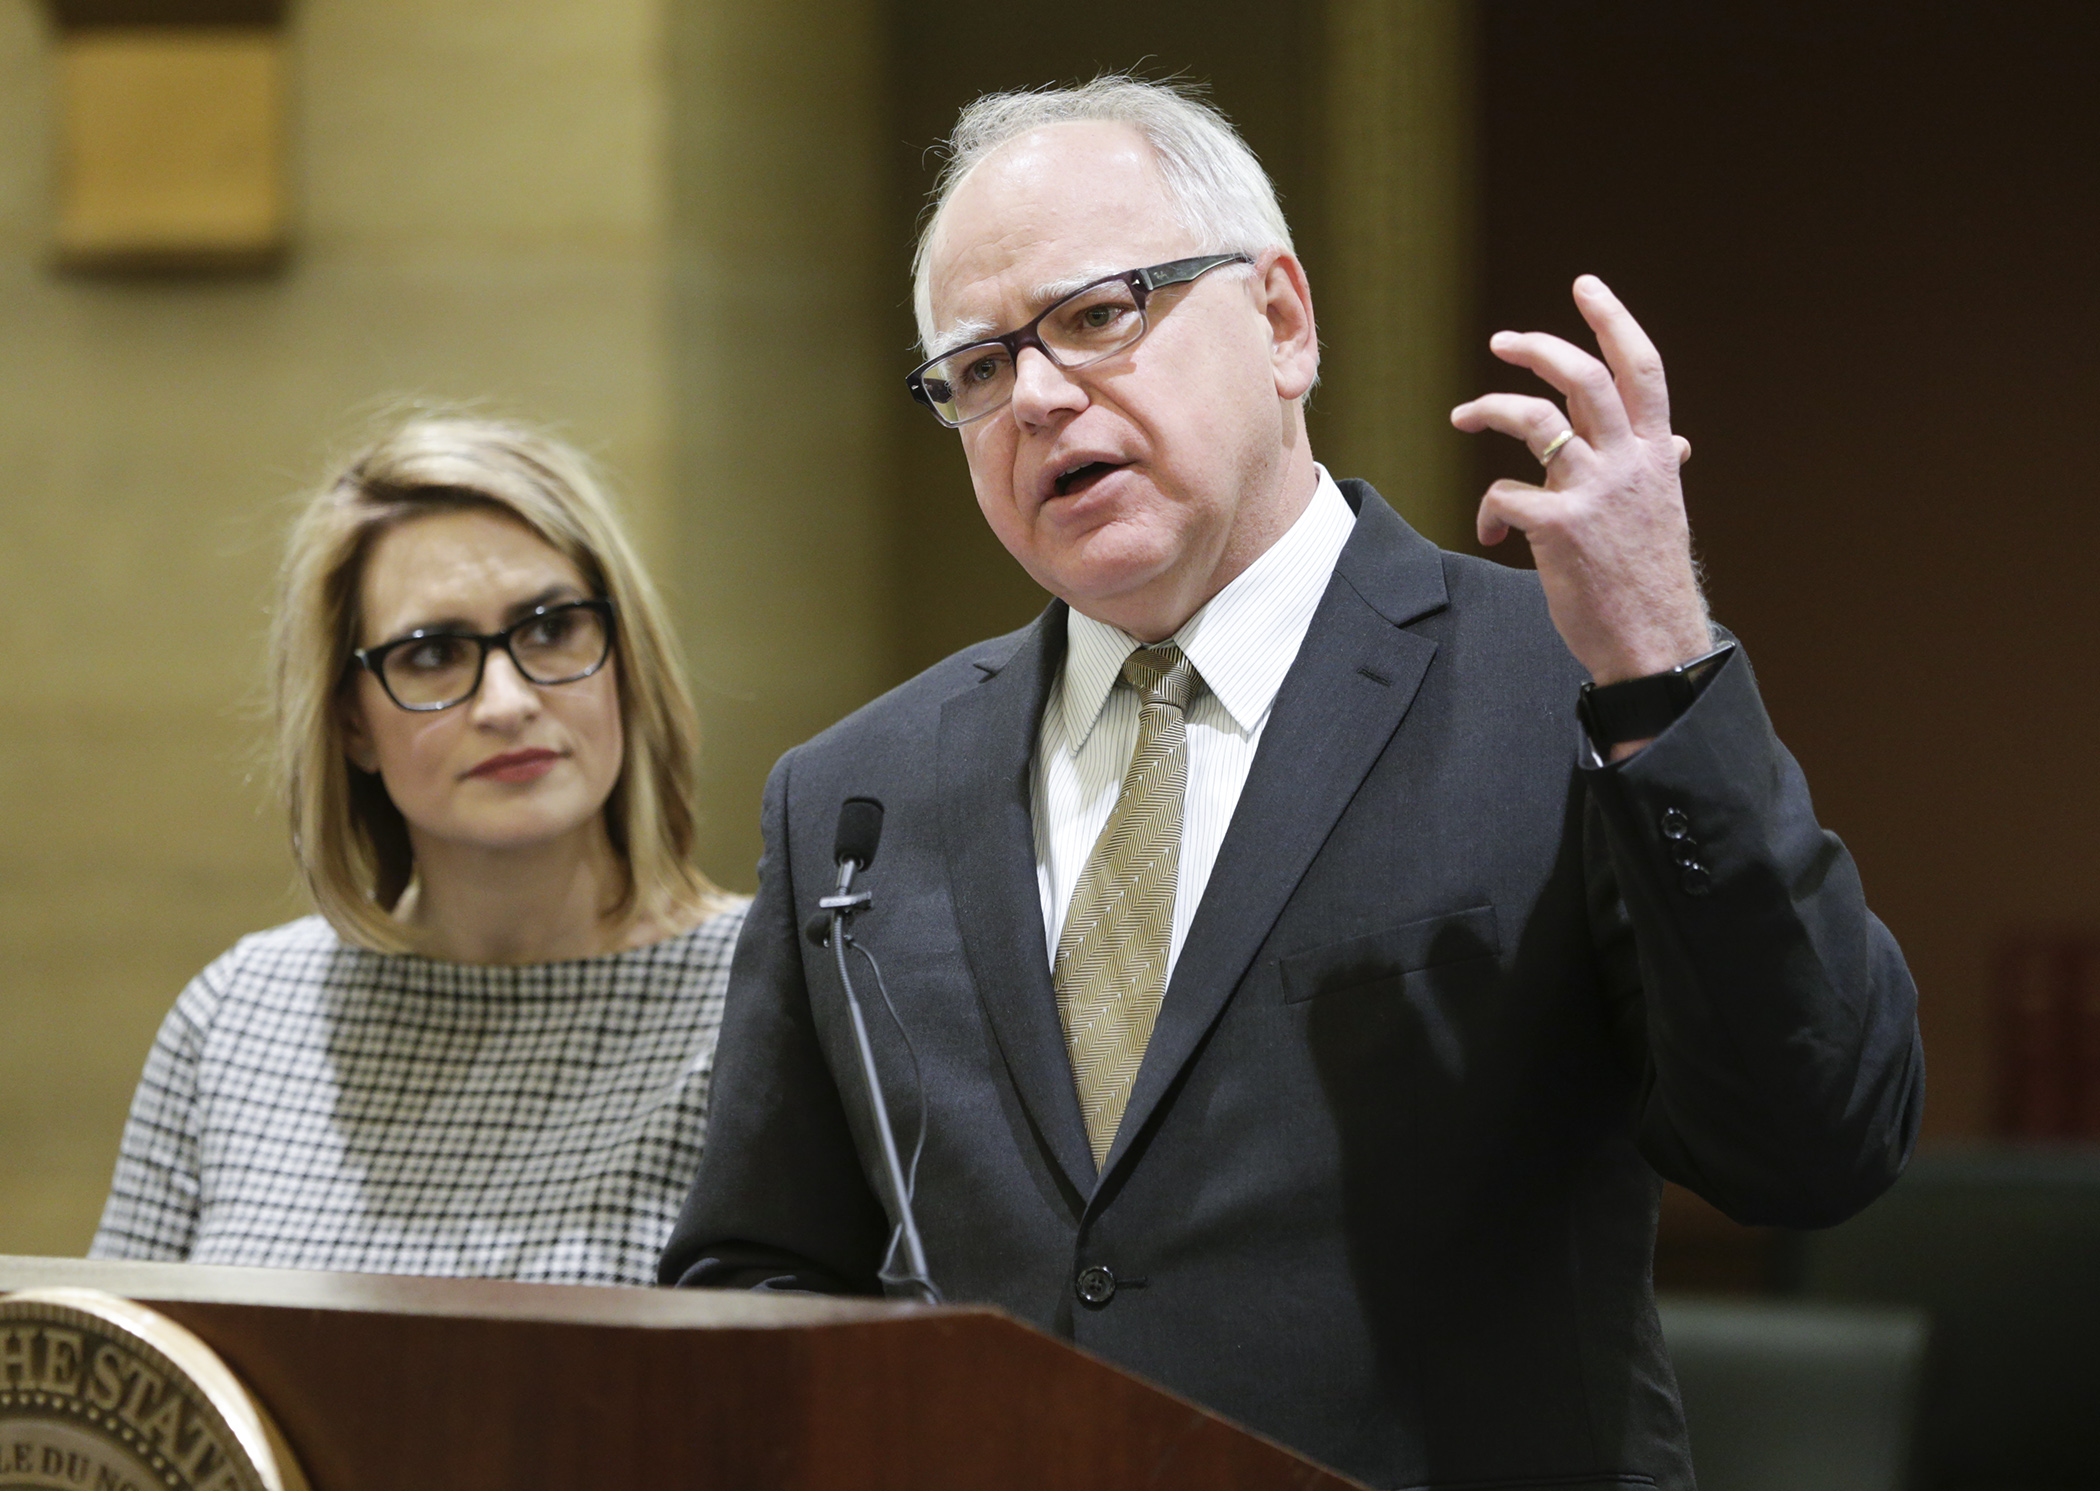 Gov.-elect Tim Walz, right, comments after the presentation on the state’s budget and economic forecast Dec. 6, which projects a $1.54 billion surplus over the next two years. Lt. Gov.-elect Peggy Flanagan looks on. Photo by Paul Battaglia